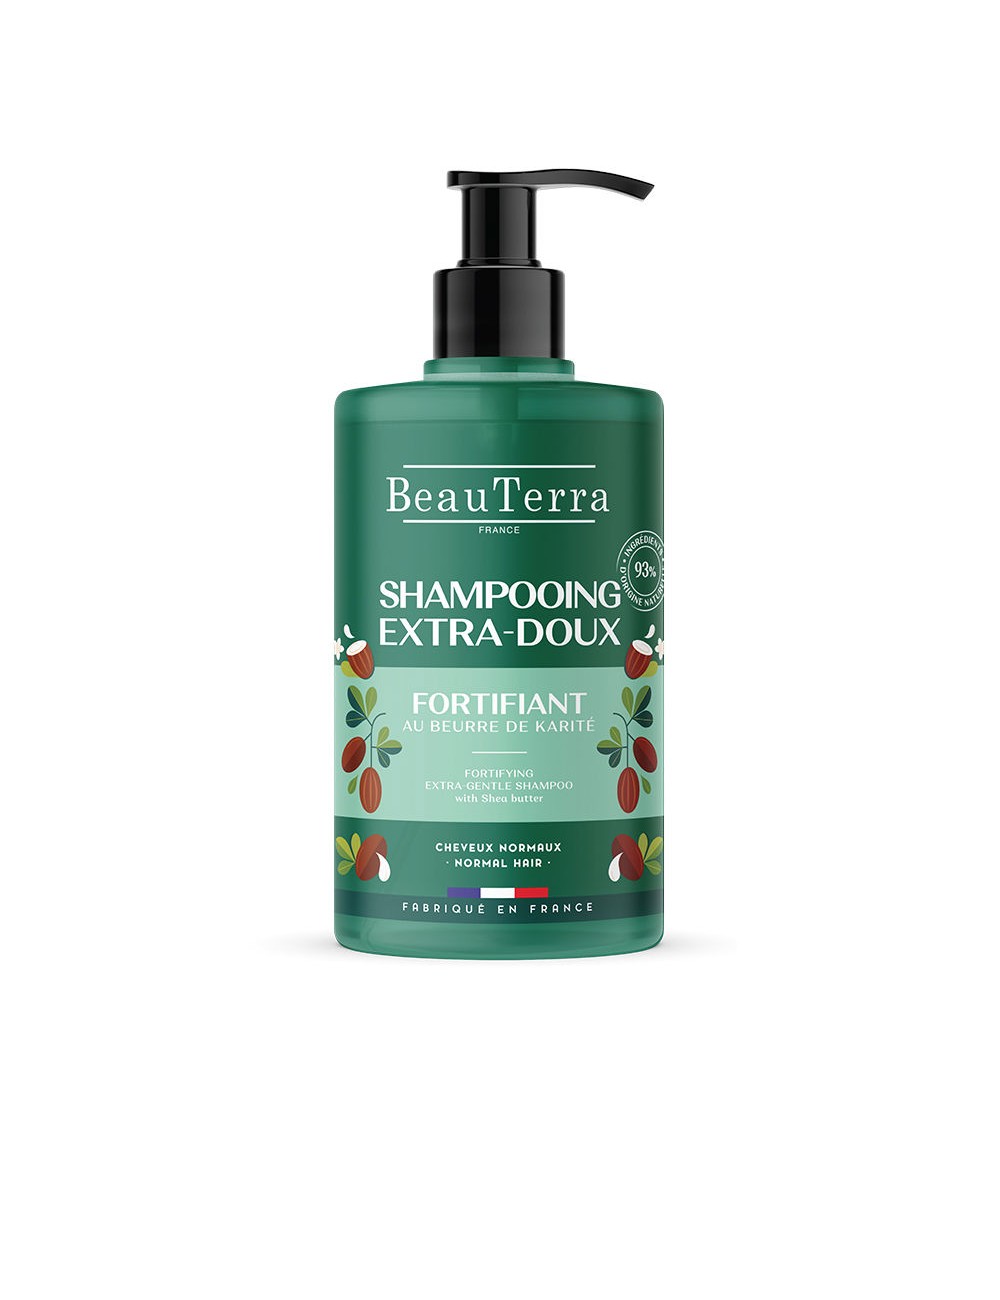 EXTRA-DOUX shampoing fortifiant 750 ml